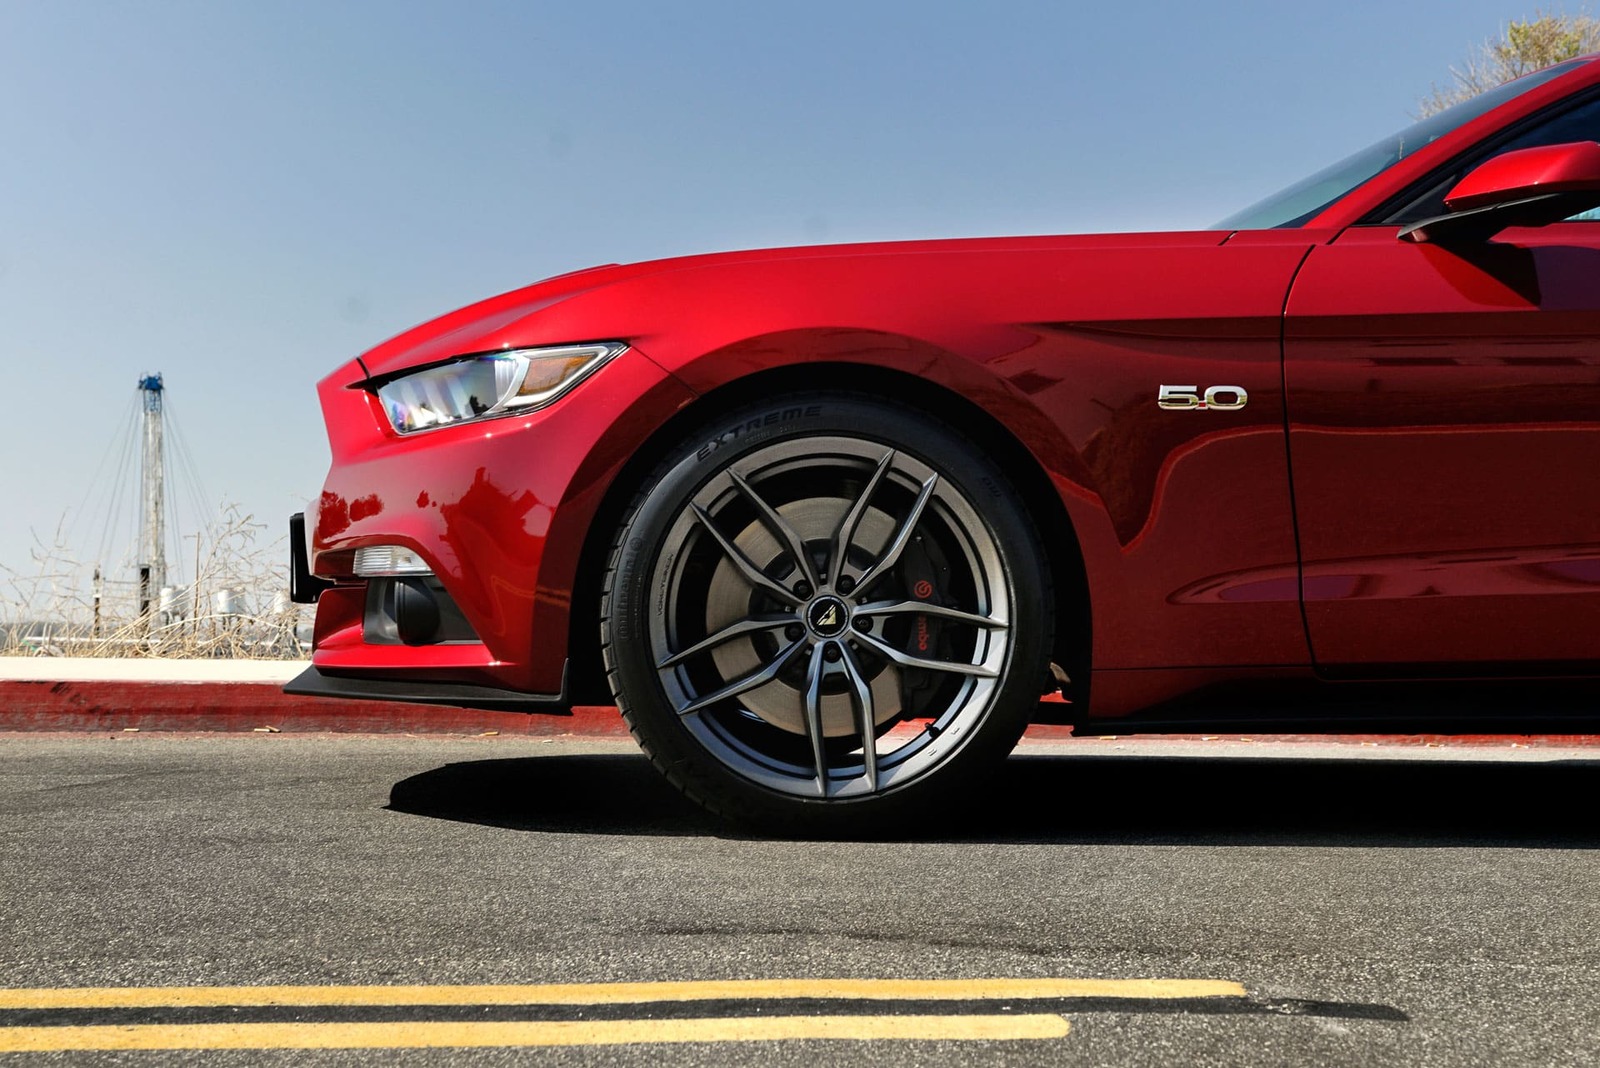 RACE-RED-FORD-MUSTANG-GTPP-S550-VORSTEINER-VFF105-CARBON-GRAPHITE-CONCAVE-MUSTANG-WHEELS-3.jpg